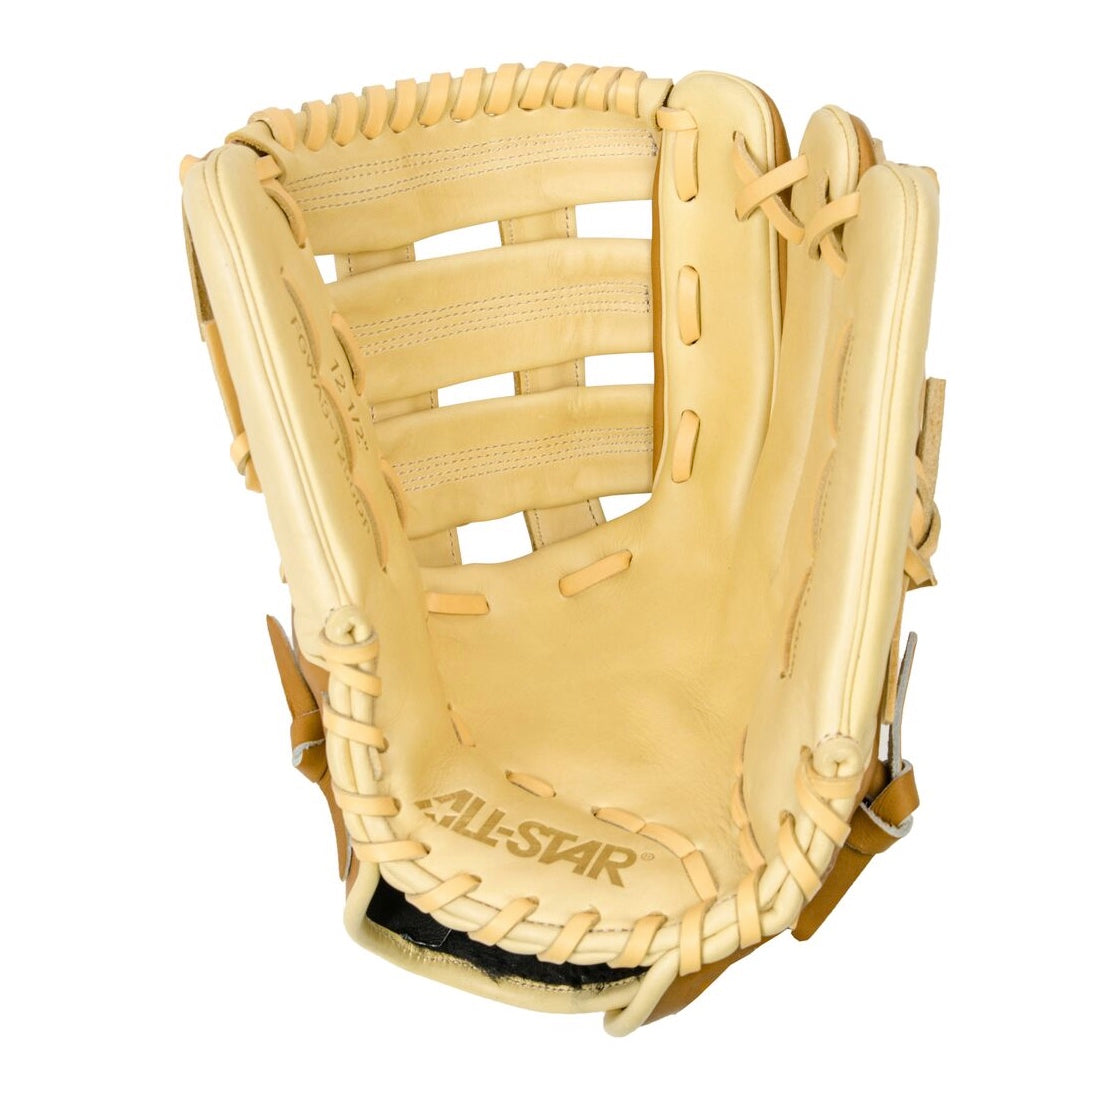 all-star-fastpitch-pro-fgwas-1250dp-outfield-glove